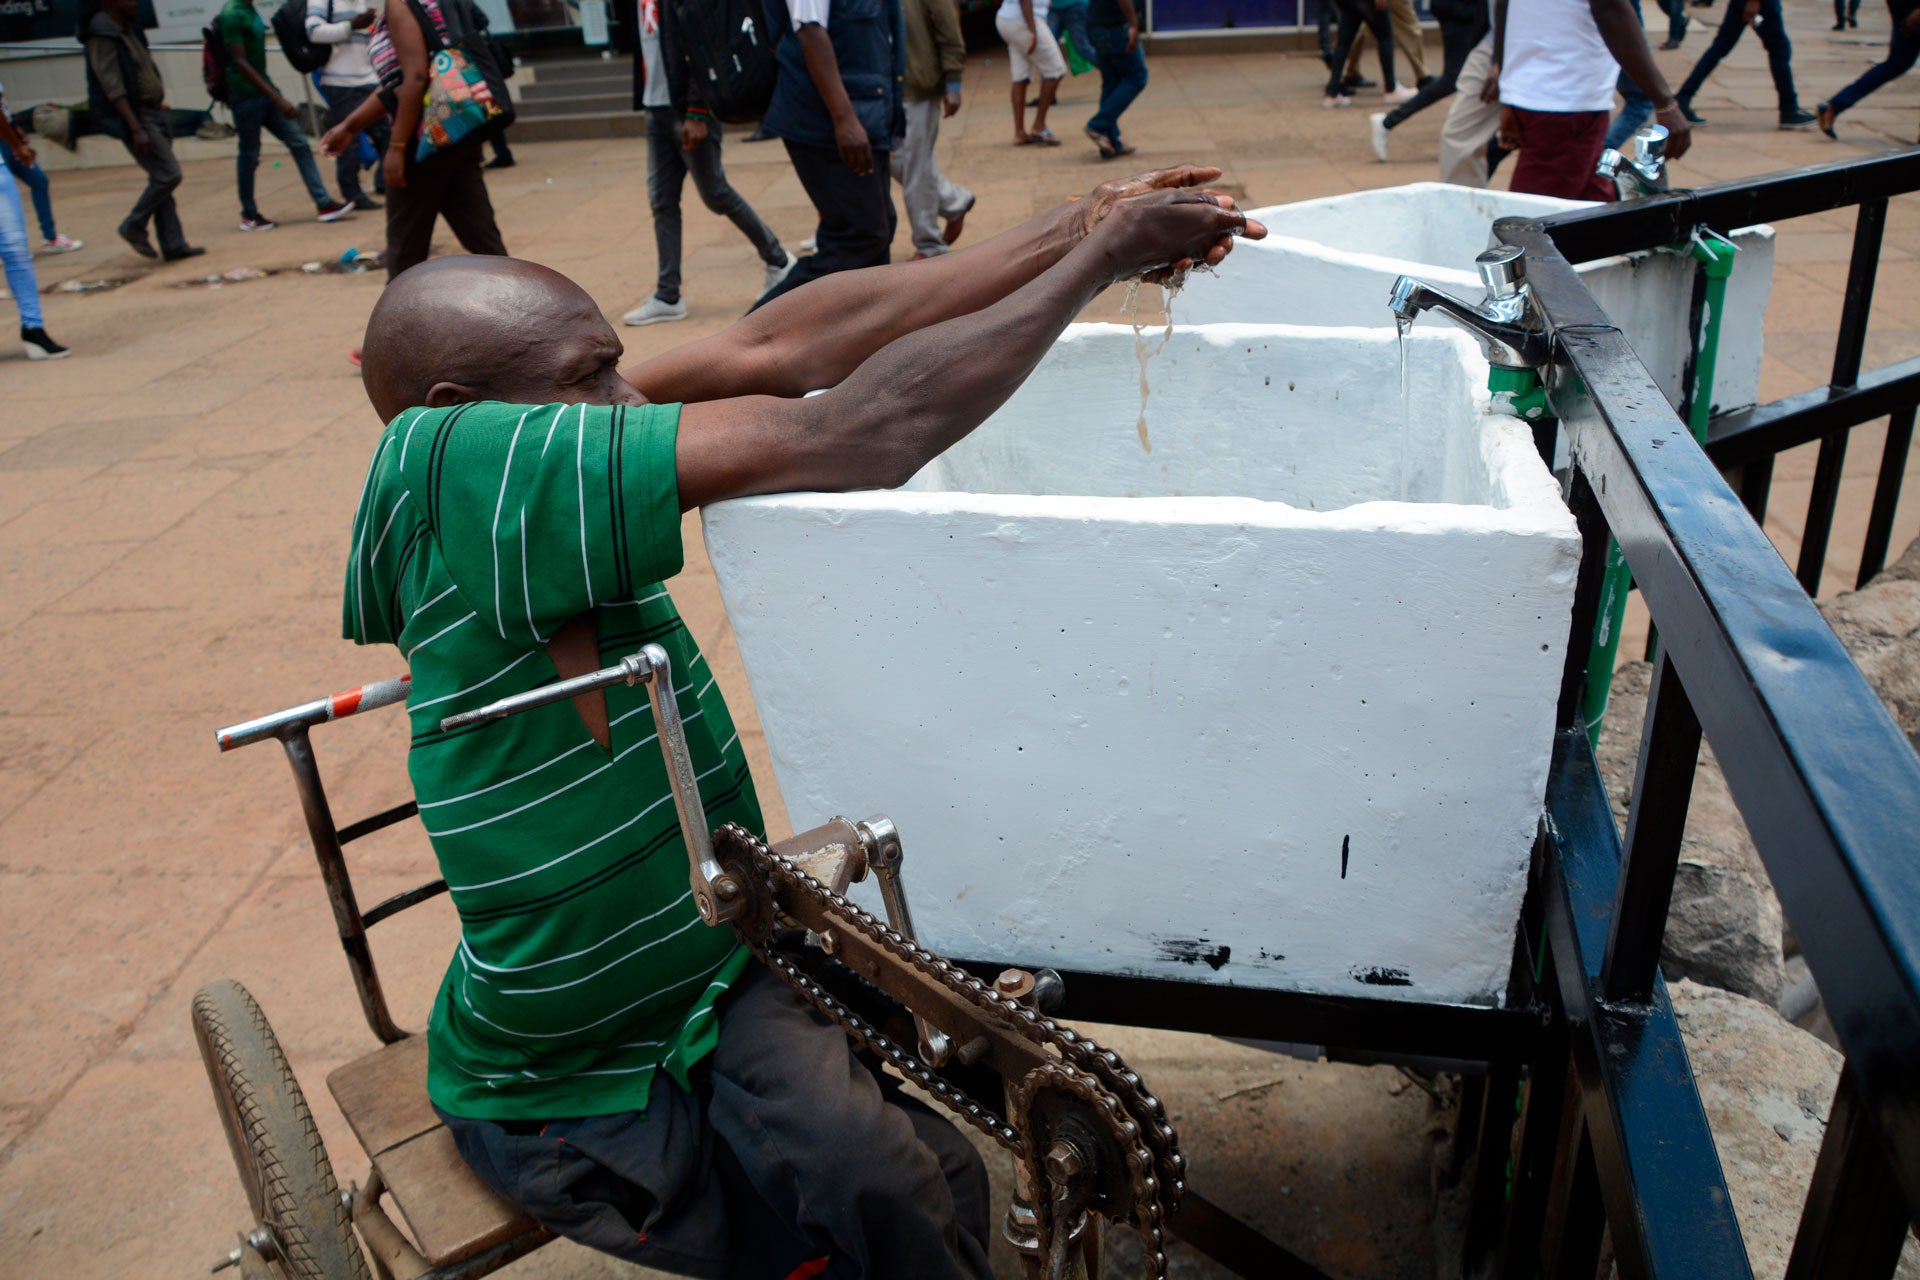 A man using a wheelchair is pictured washing his hands in a public water tap in Nairobi, Kenya, as a preventive measure against COVID-19, March 22, 2020.